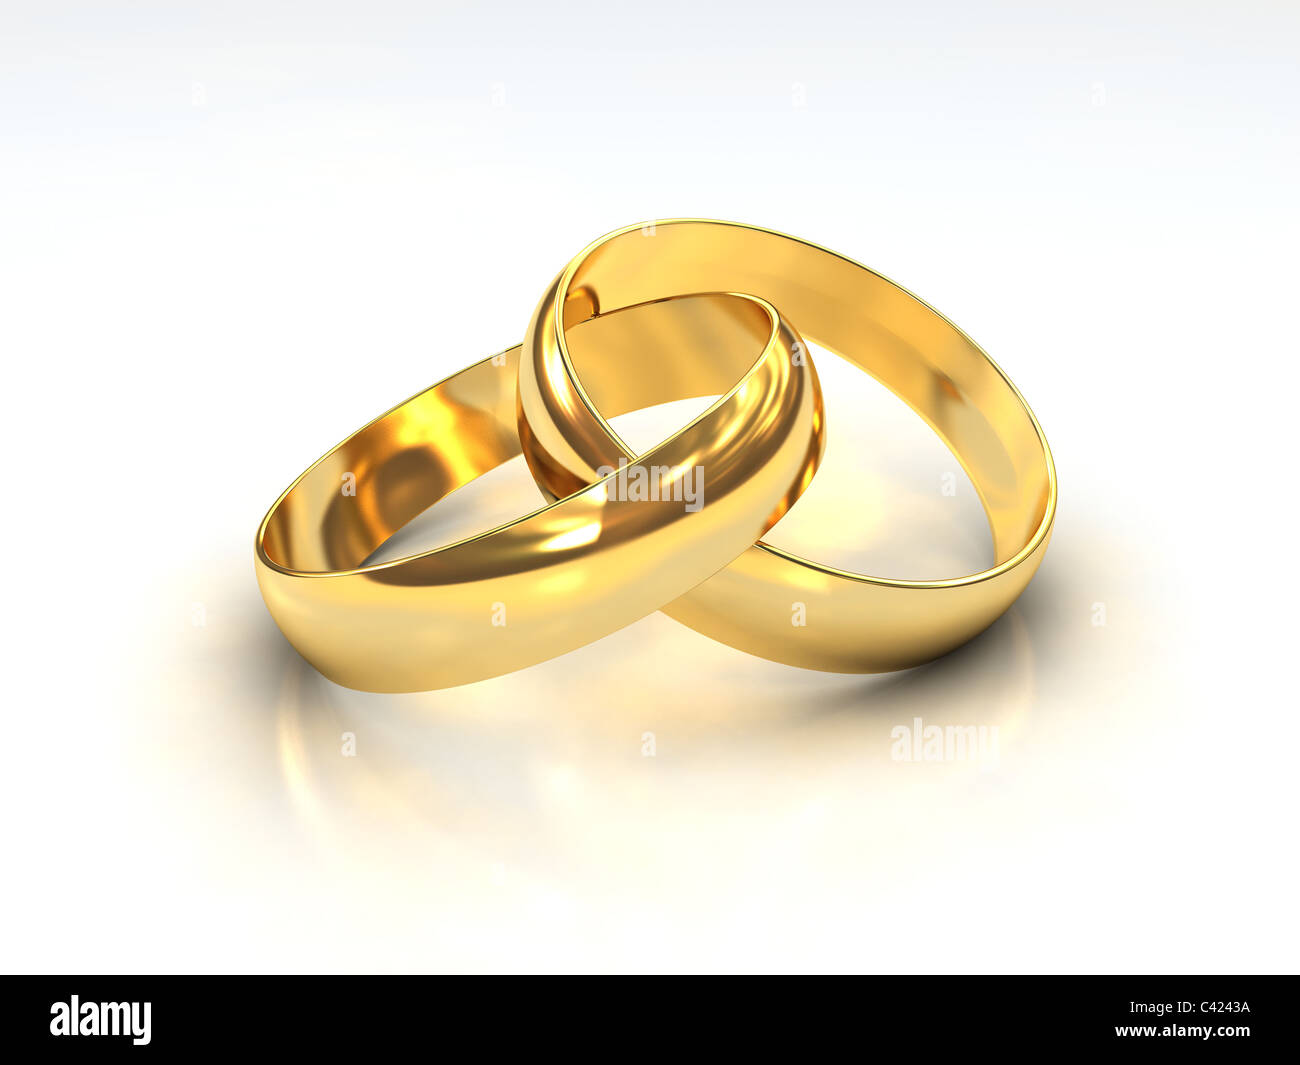 A Pair of golden Wedding Rings on white background Stock Photo